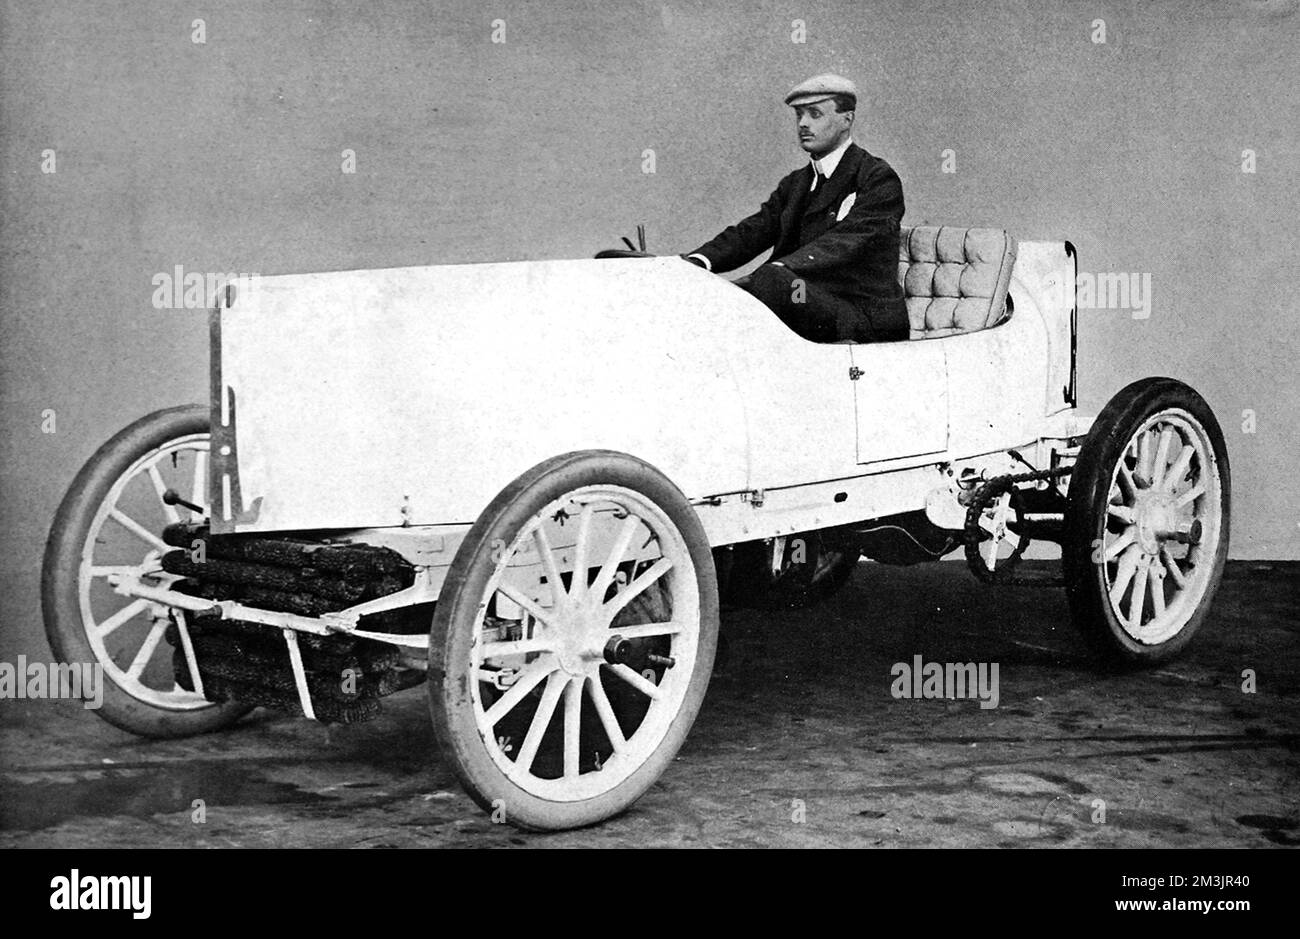 The Hon. C. S. Rolls in his special racing car.  The car beat the world record for 1 km, covering the distance in 27 secs, equal to 83mph. Rolls later died in 1910 in a plane crash.     Date: March 18th 1903 Stock Photo